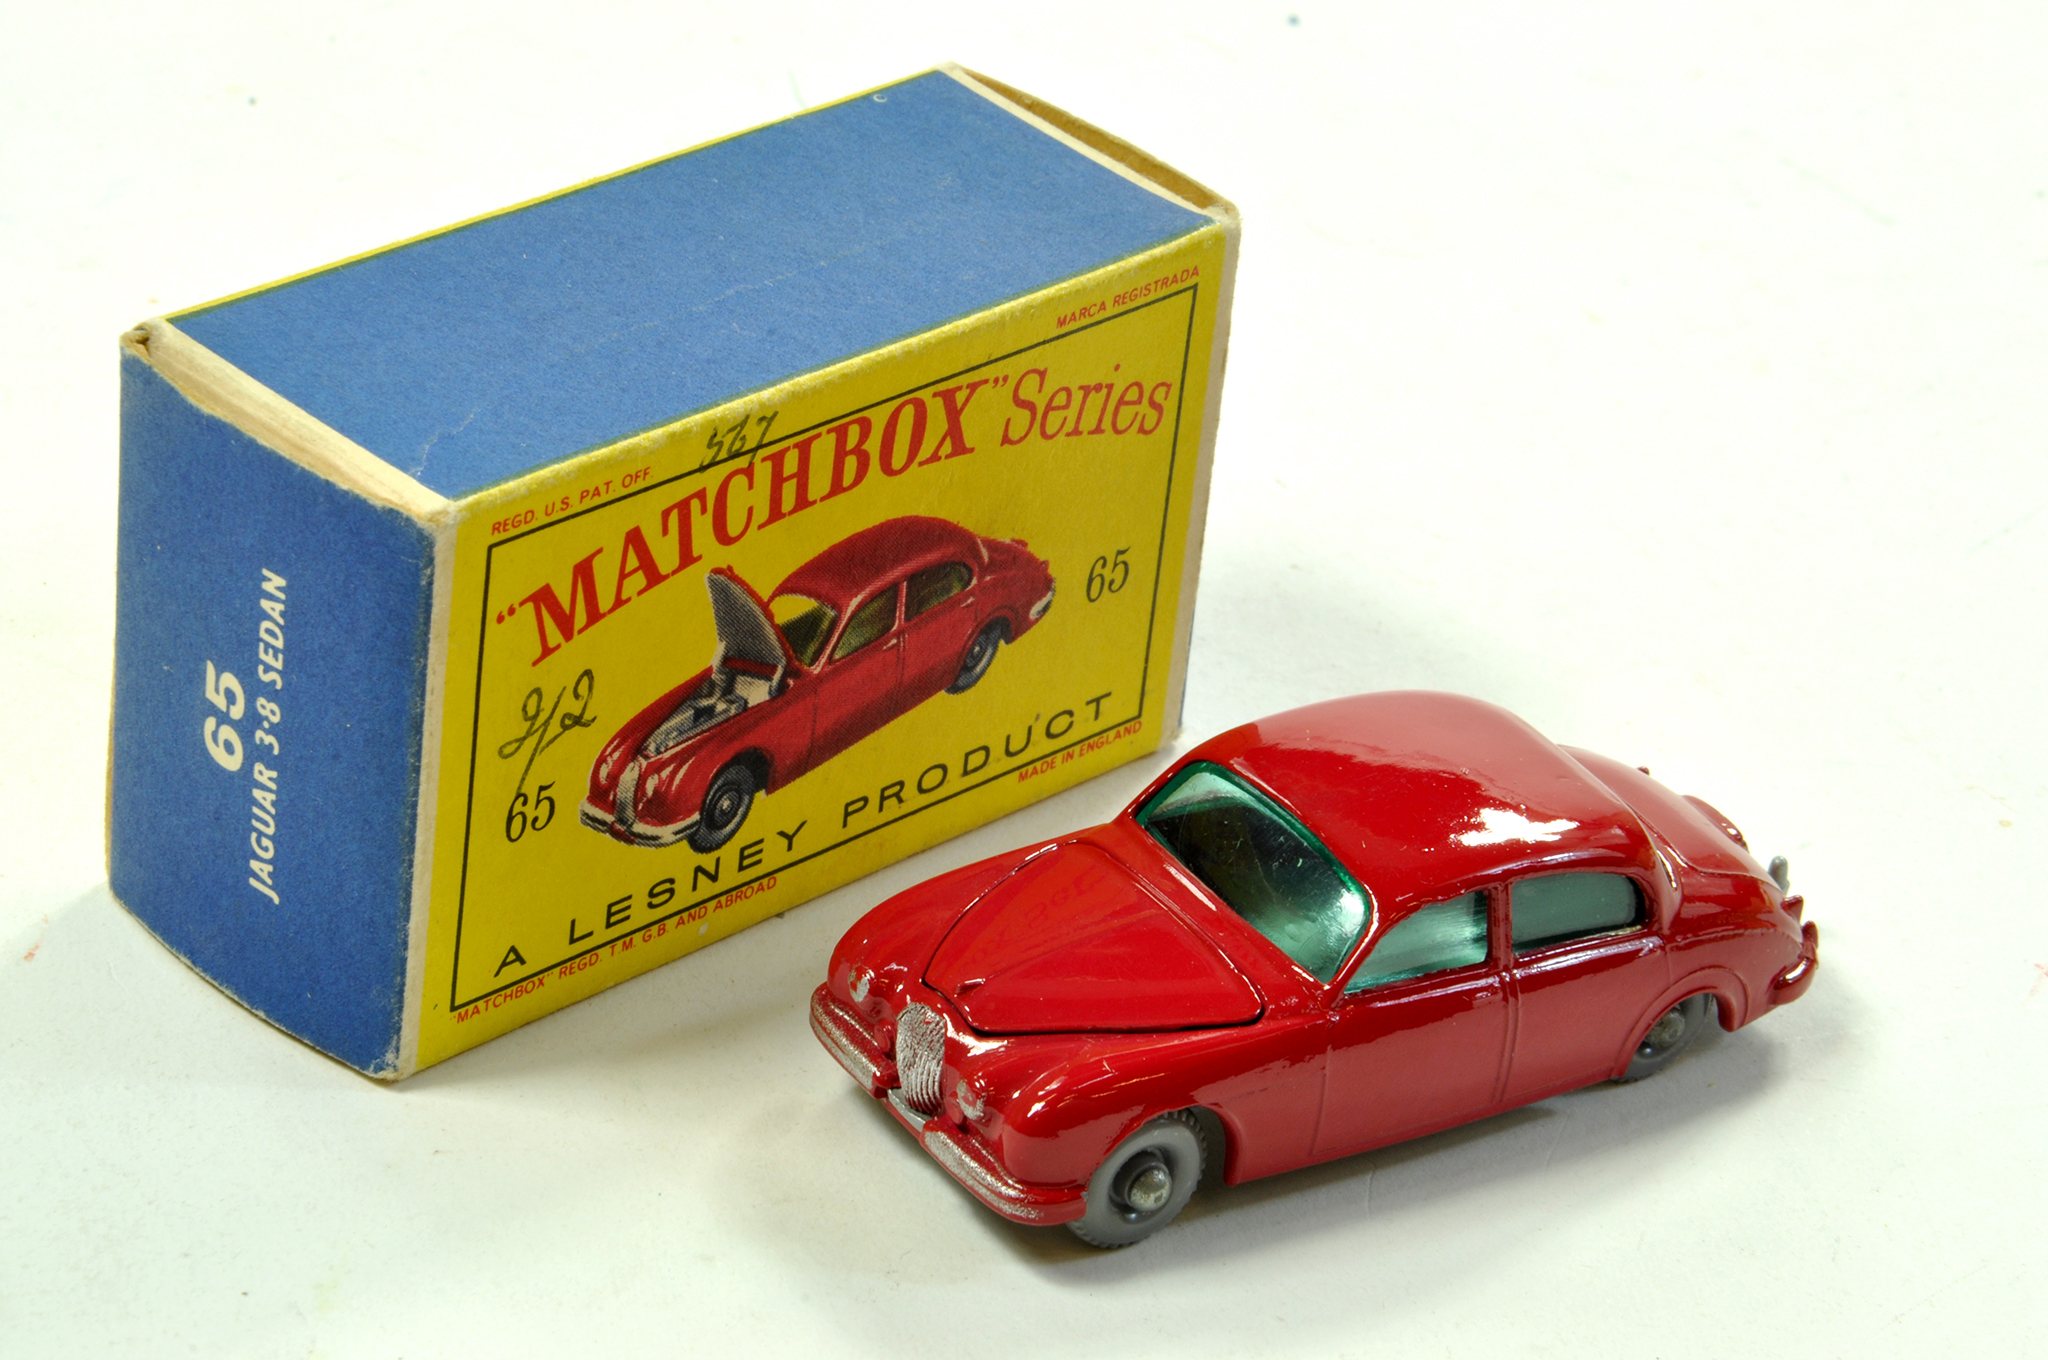 Matchbox Regular Wheels No. 65b Jaguar 3.8 litre Saloon. Lovely example is very good to excellent in